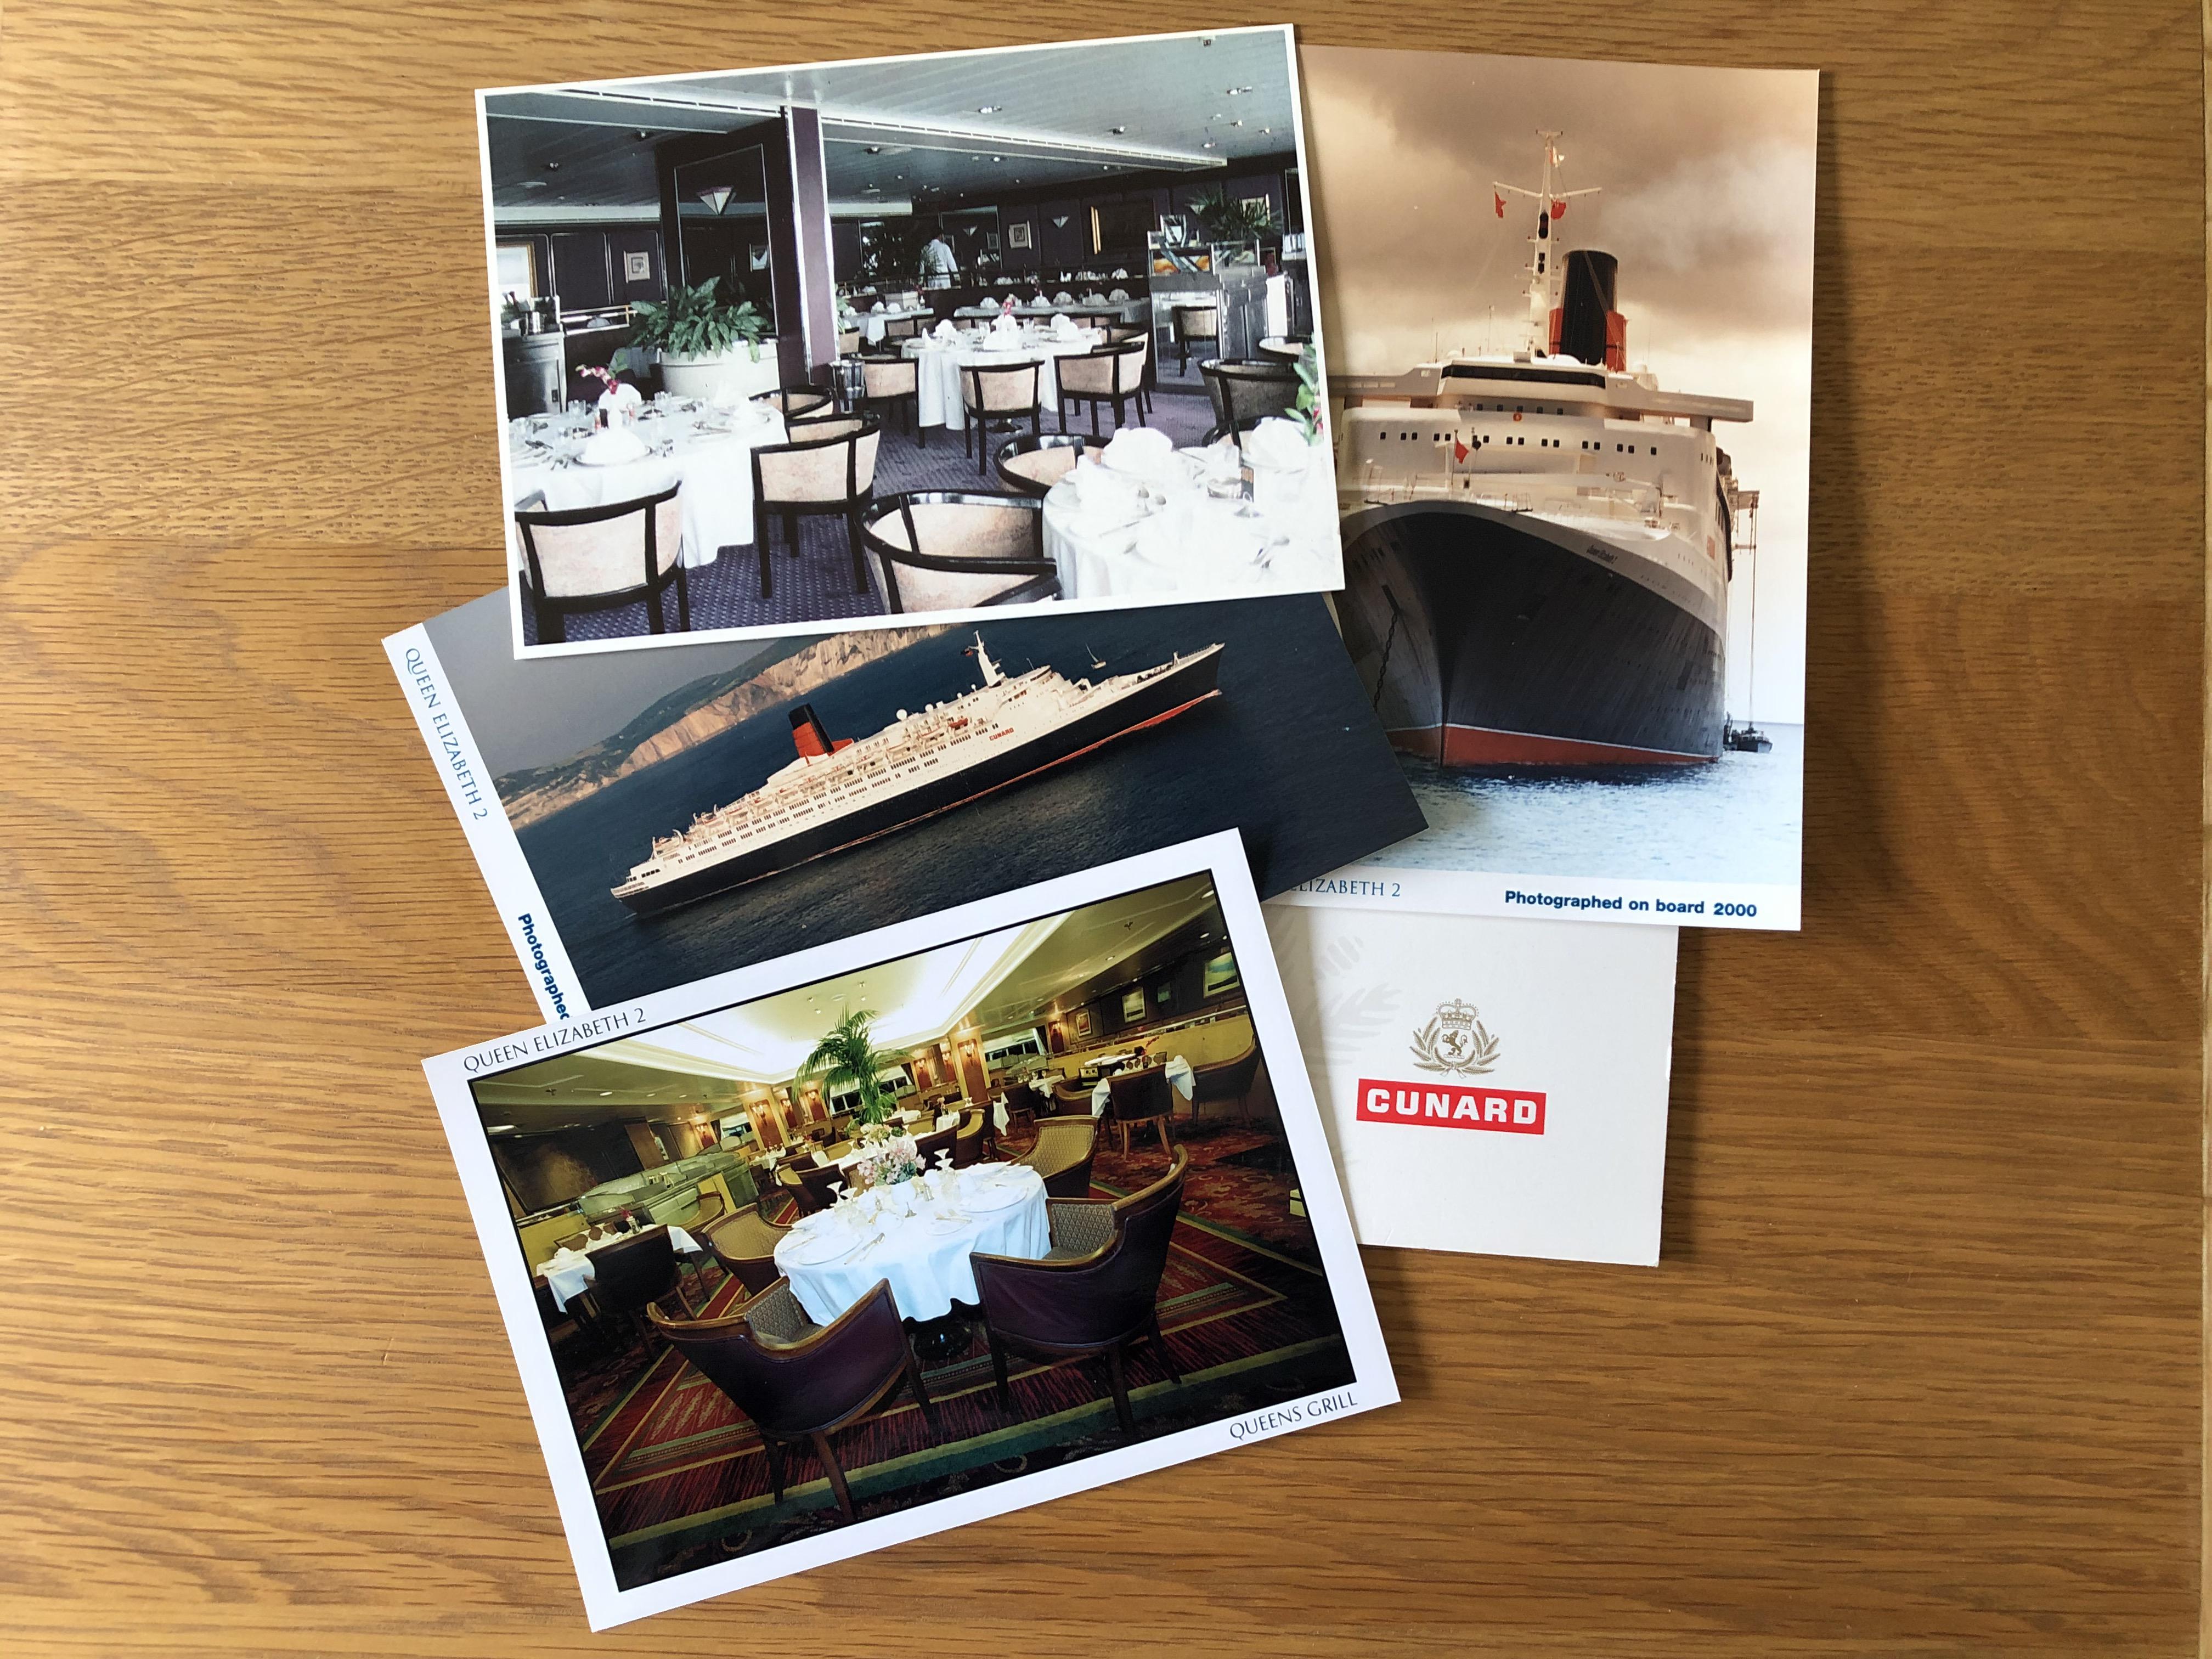 SET OF PHOTOGRAPHS PACK FROM THE CUNARD VESSEL THE QUEEN ELIZABETH 2